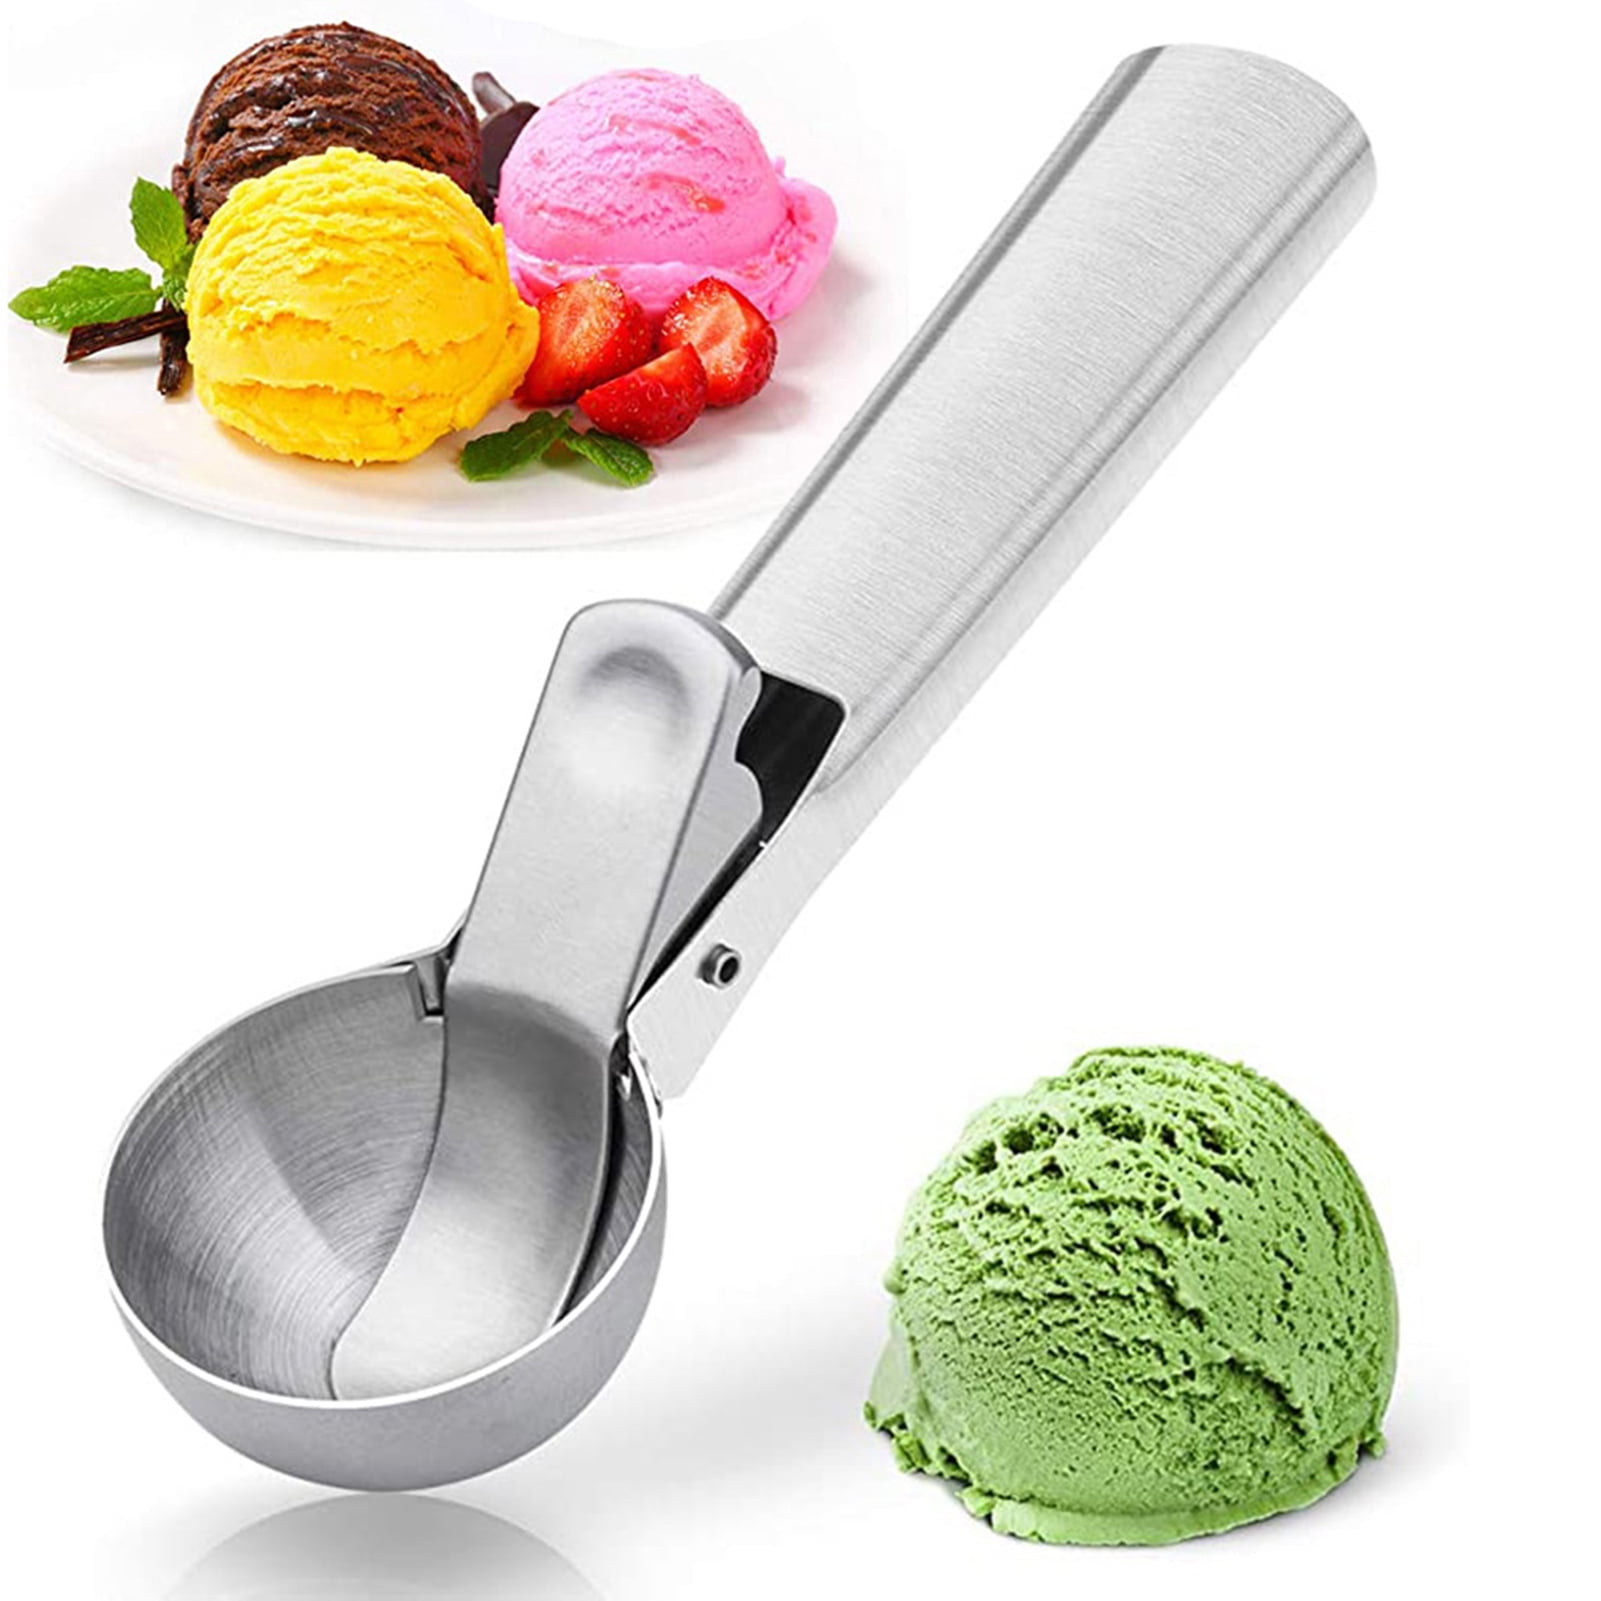 Ludlz Stainless Steel Ice Cream Scooper with Trigger, Small, Medium and  Large Cookie Scoops for Baking, Easy to Clean, Highly Durable, Ergonomic  Handle Cookie Dough Scoop 